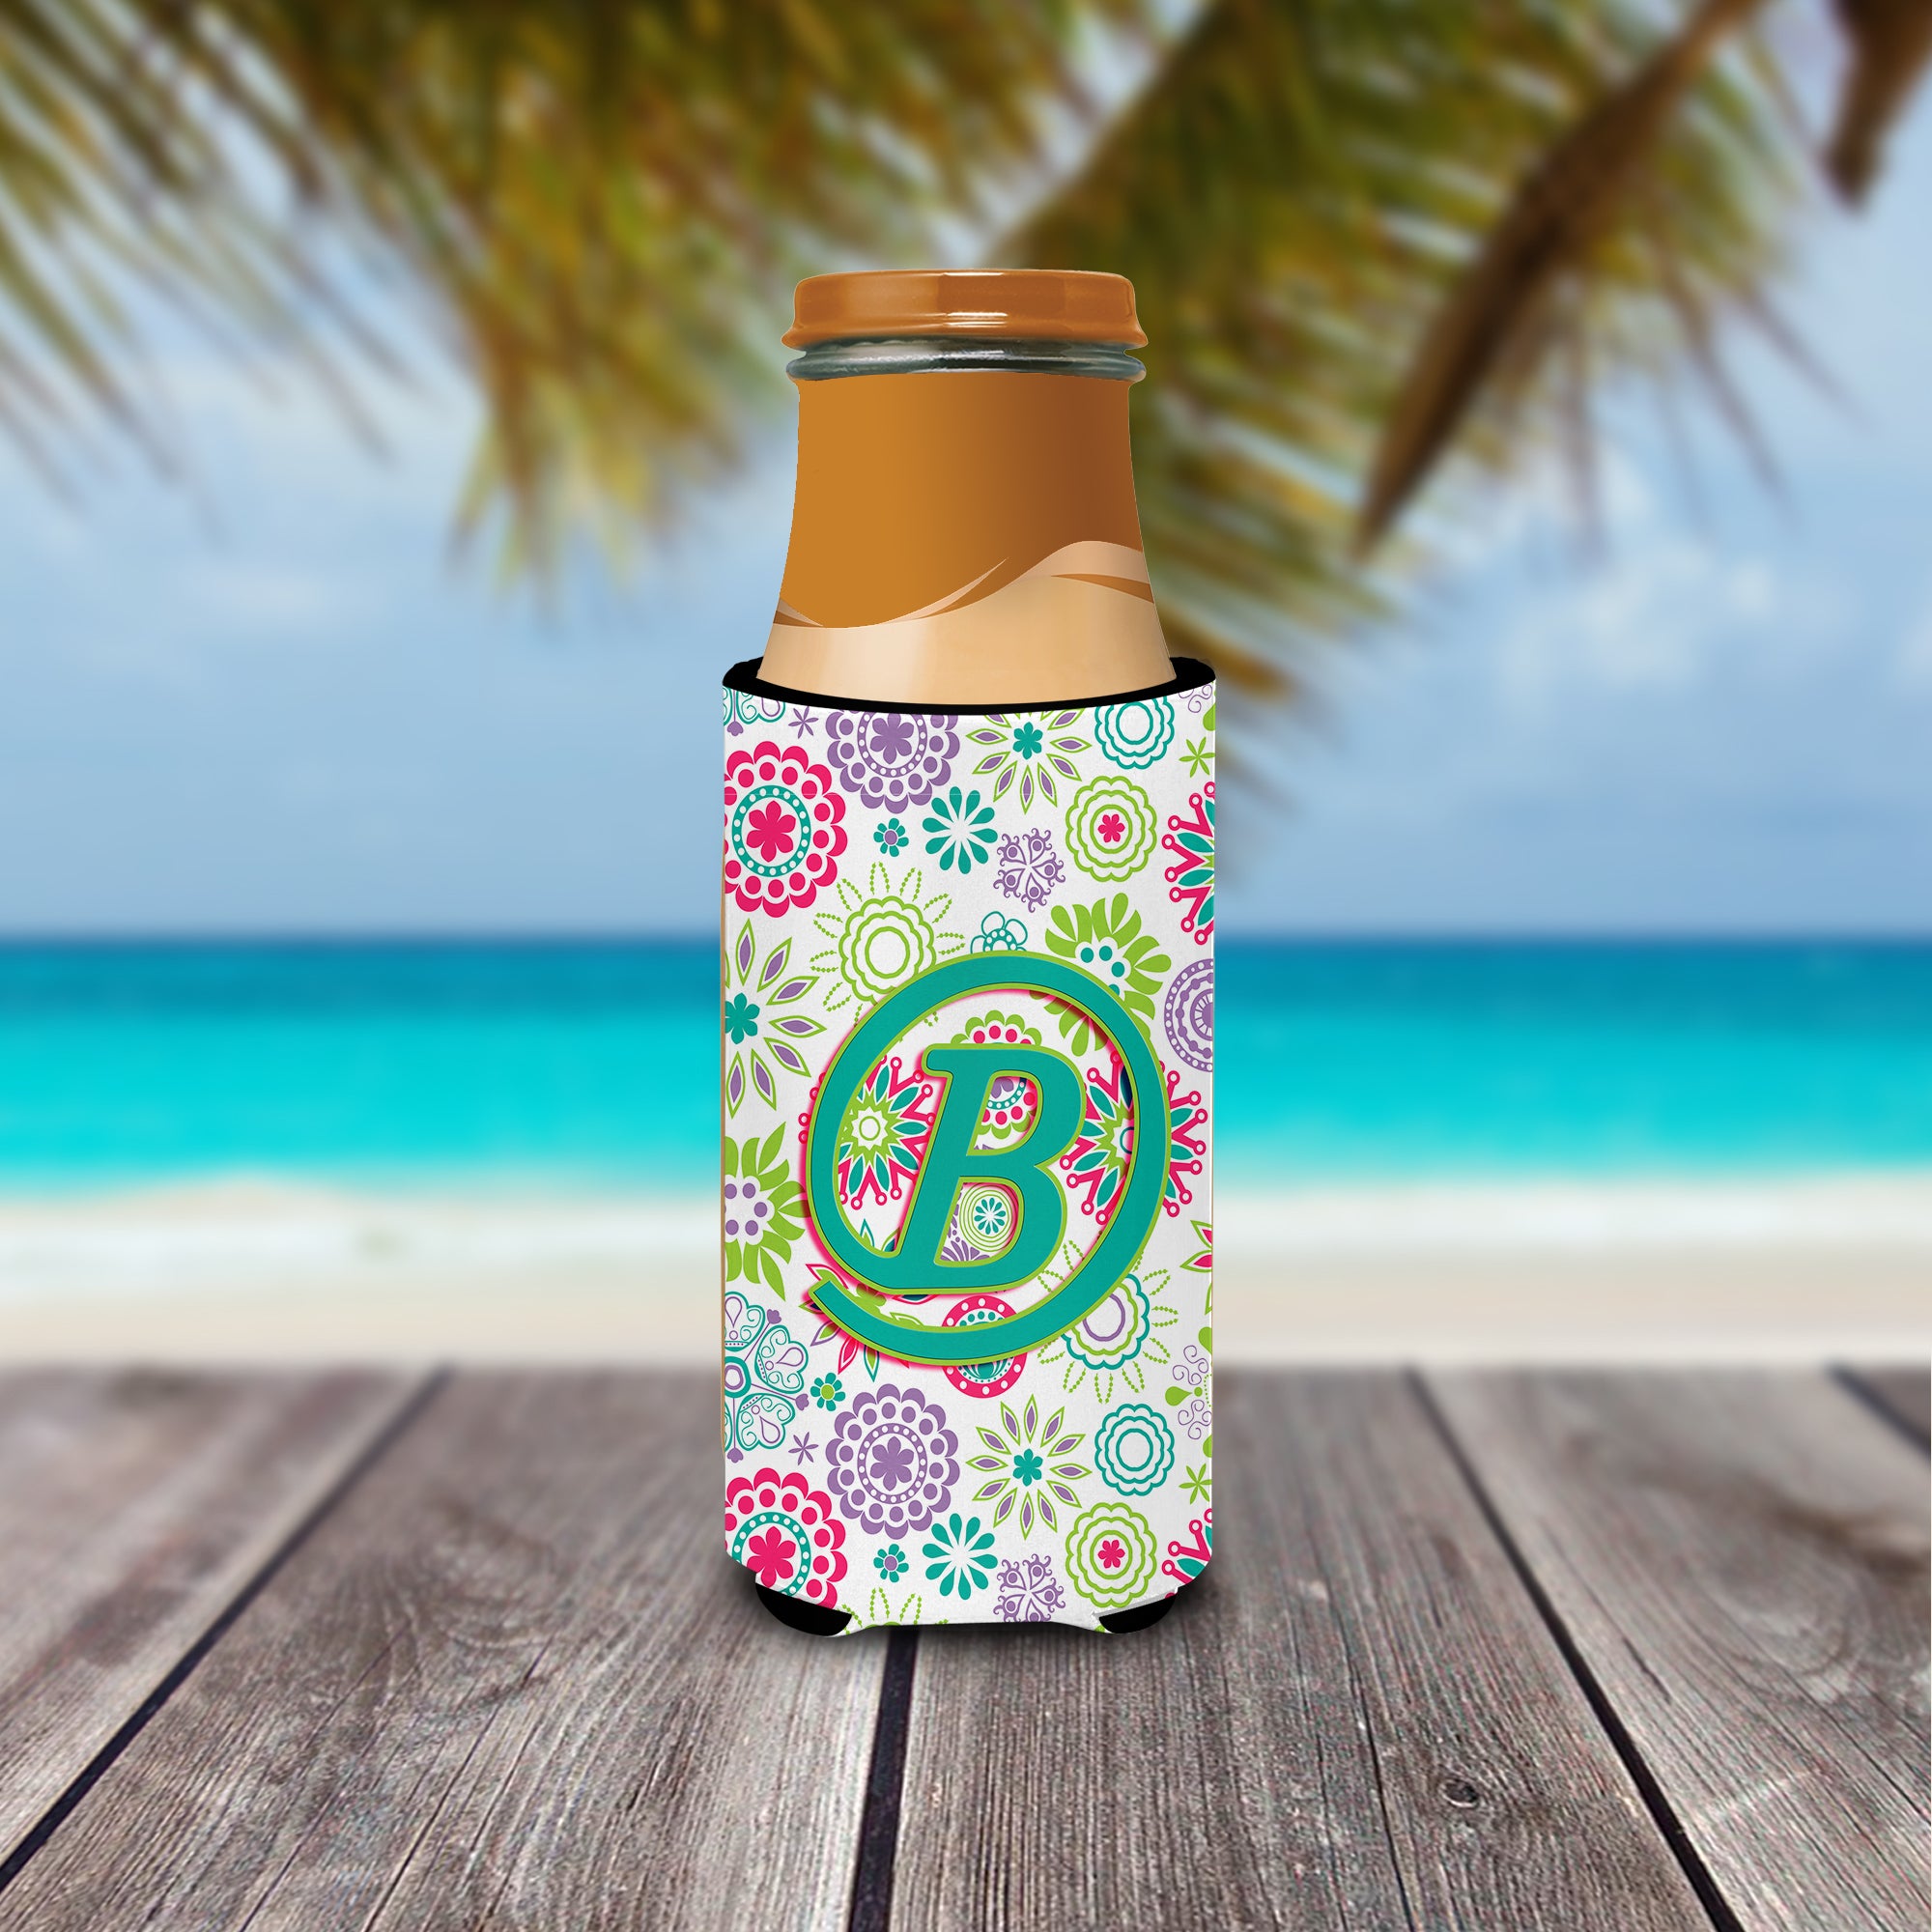 Letter B Flowers Pink Teal Green Initial Ultra Beverage Insulators for slim cans CJ2011-BMUK